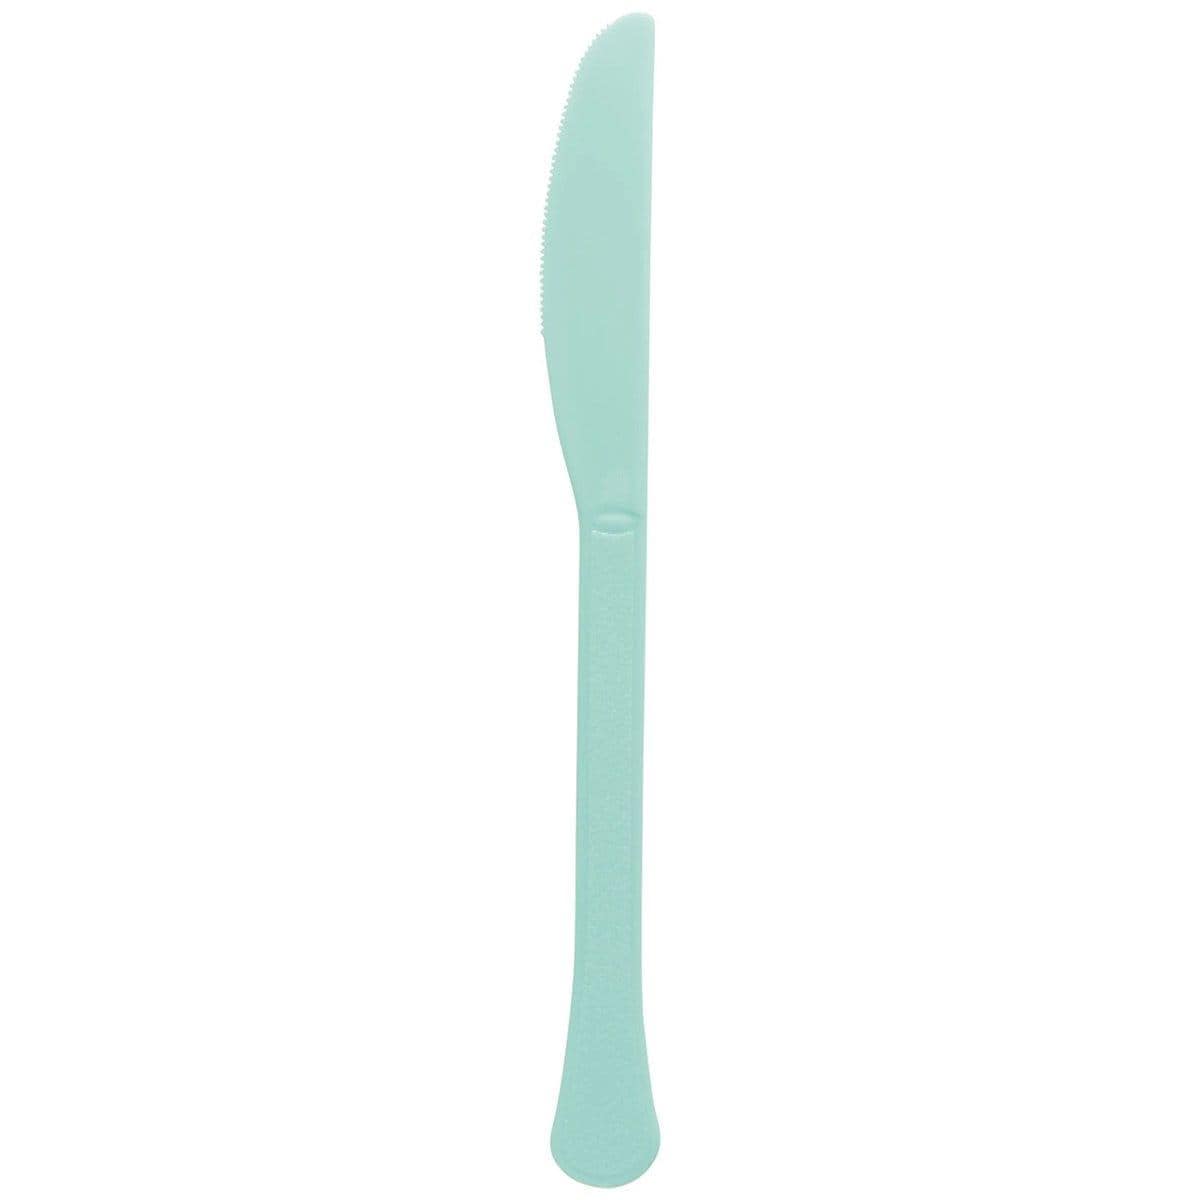 Buy Plasticware Robin's Egg Blue Plastic Knives, 20 Count sold at Party Expert